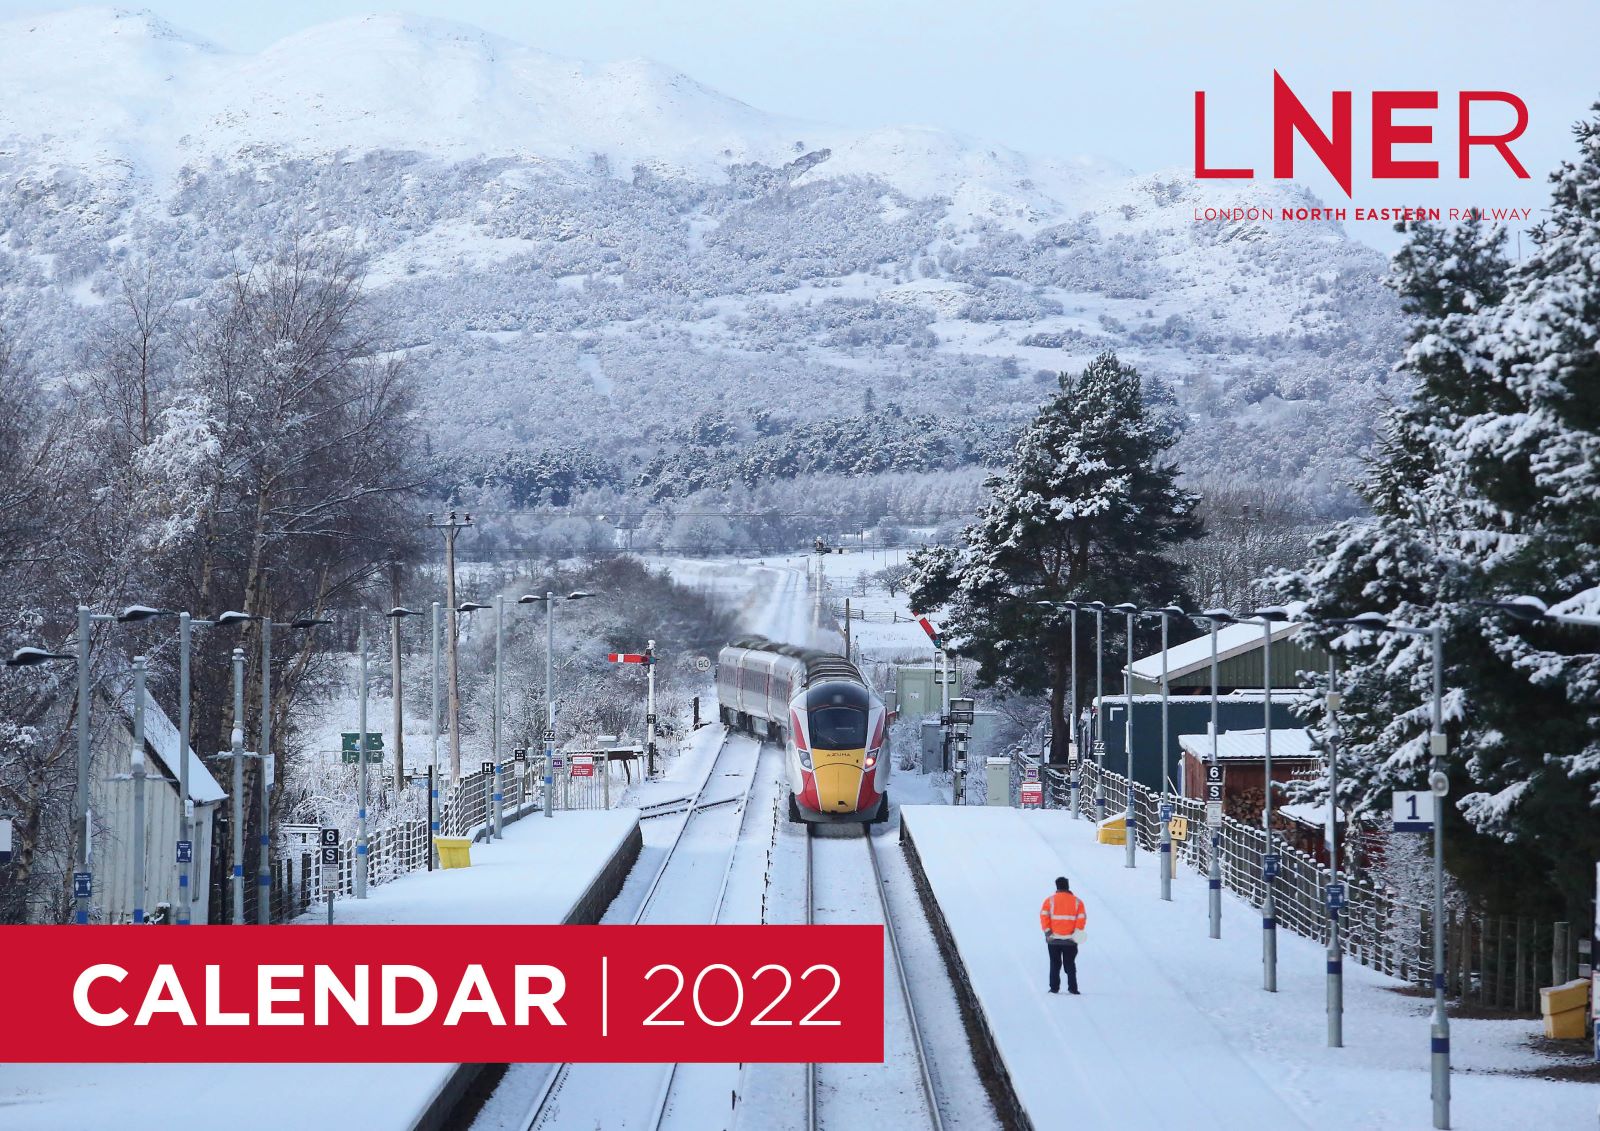 Save the date! LNER launches 2022 calendar to celebrate destinations and heritage